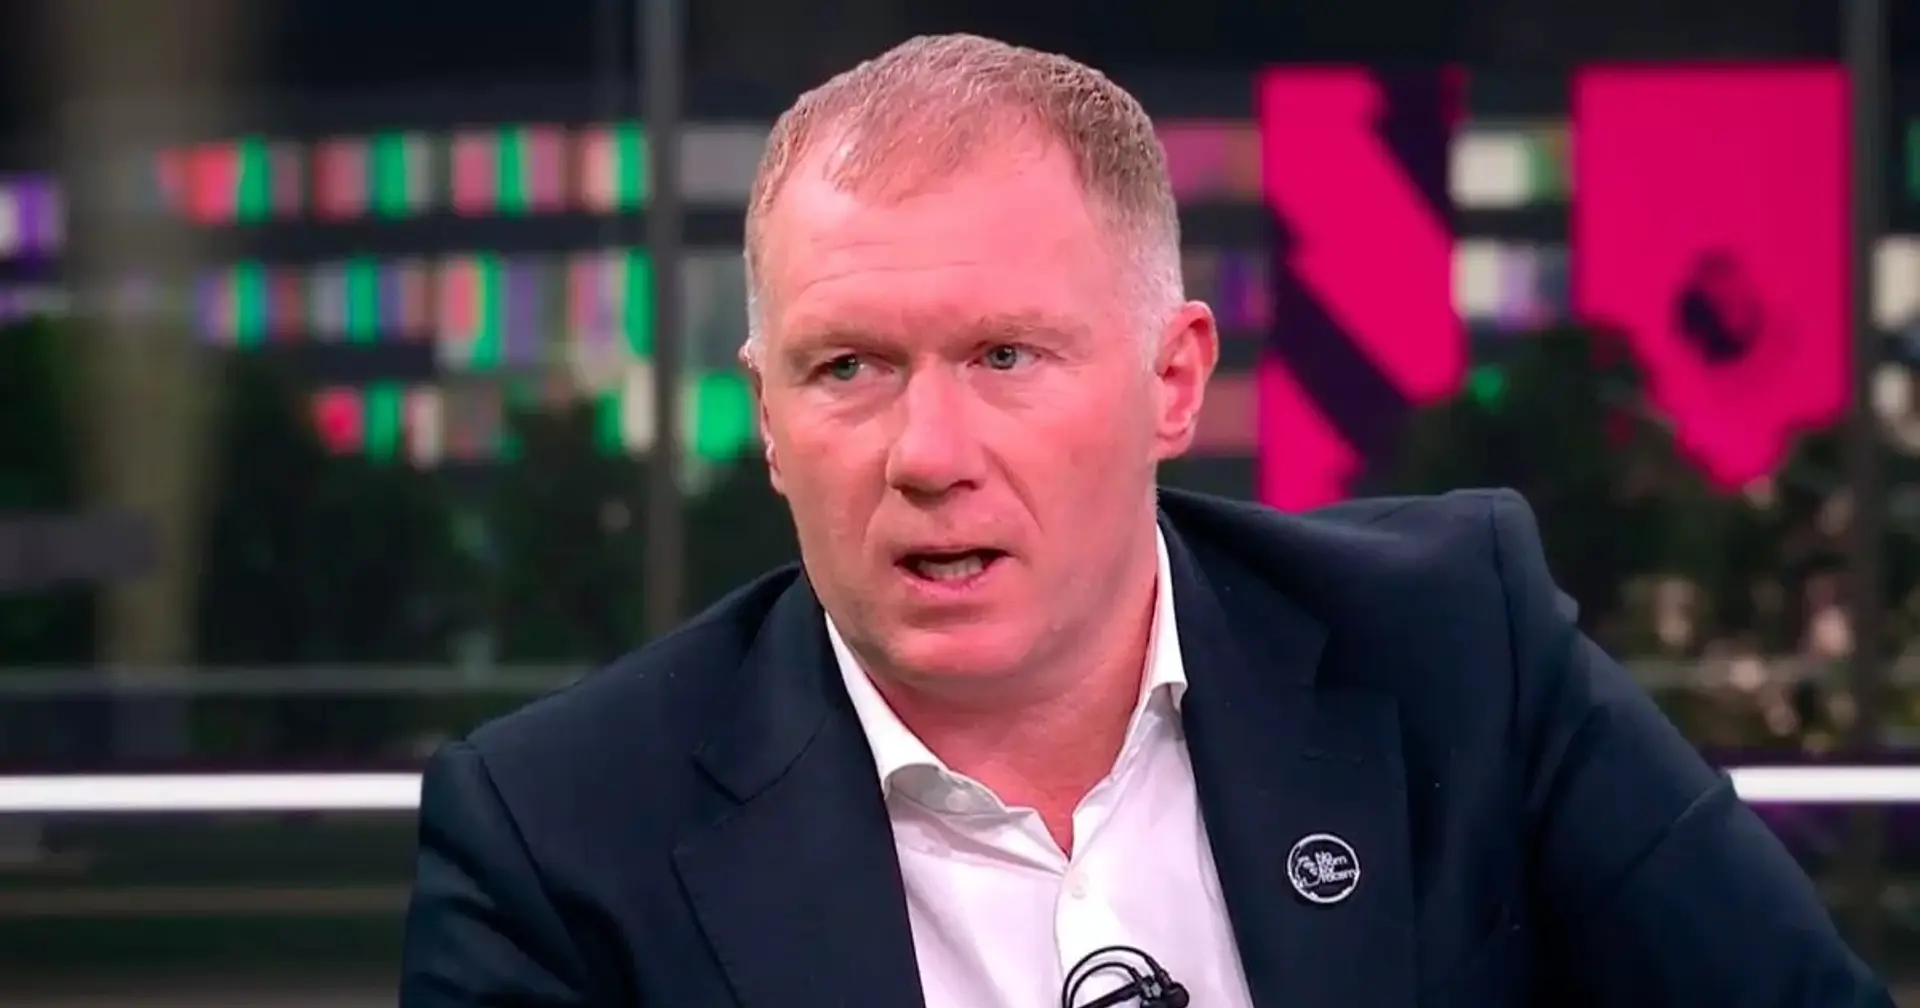 'INEOS made up their mind': Paul Scholes believes Ten Hag's fate is already sealed